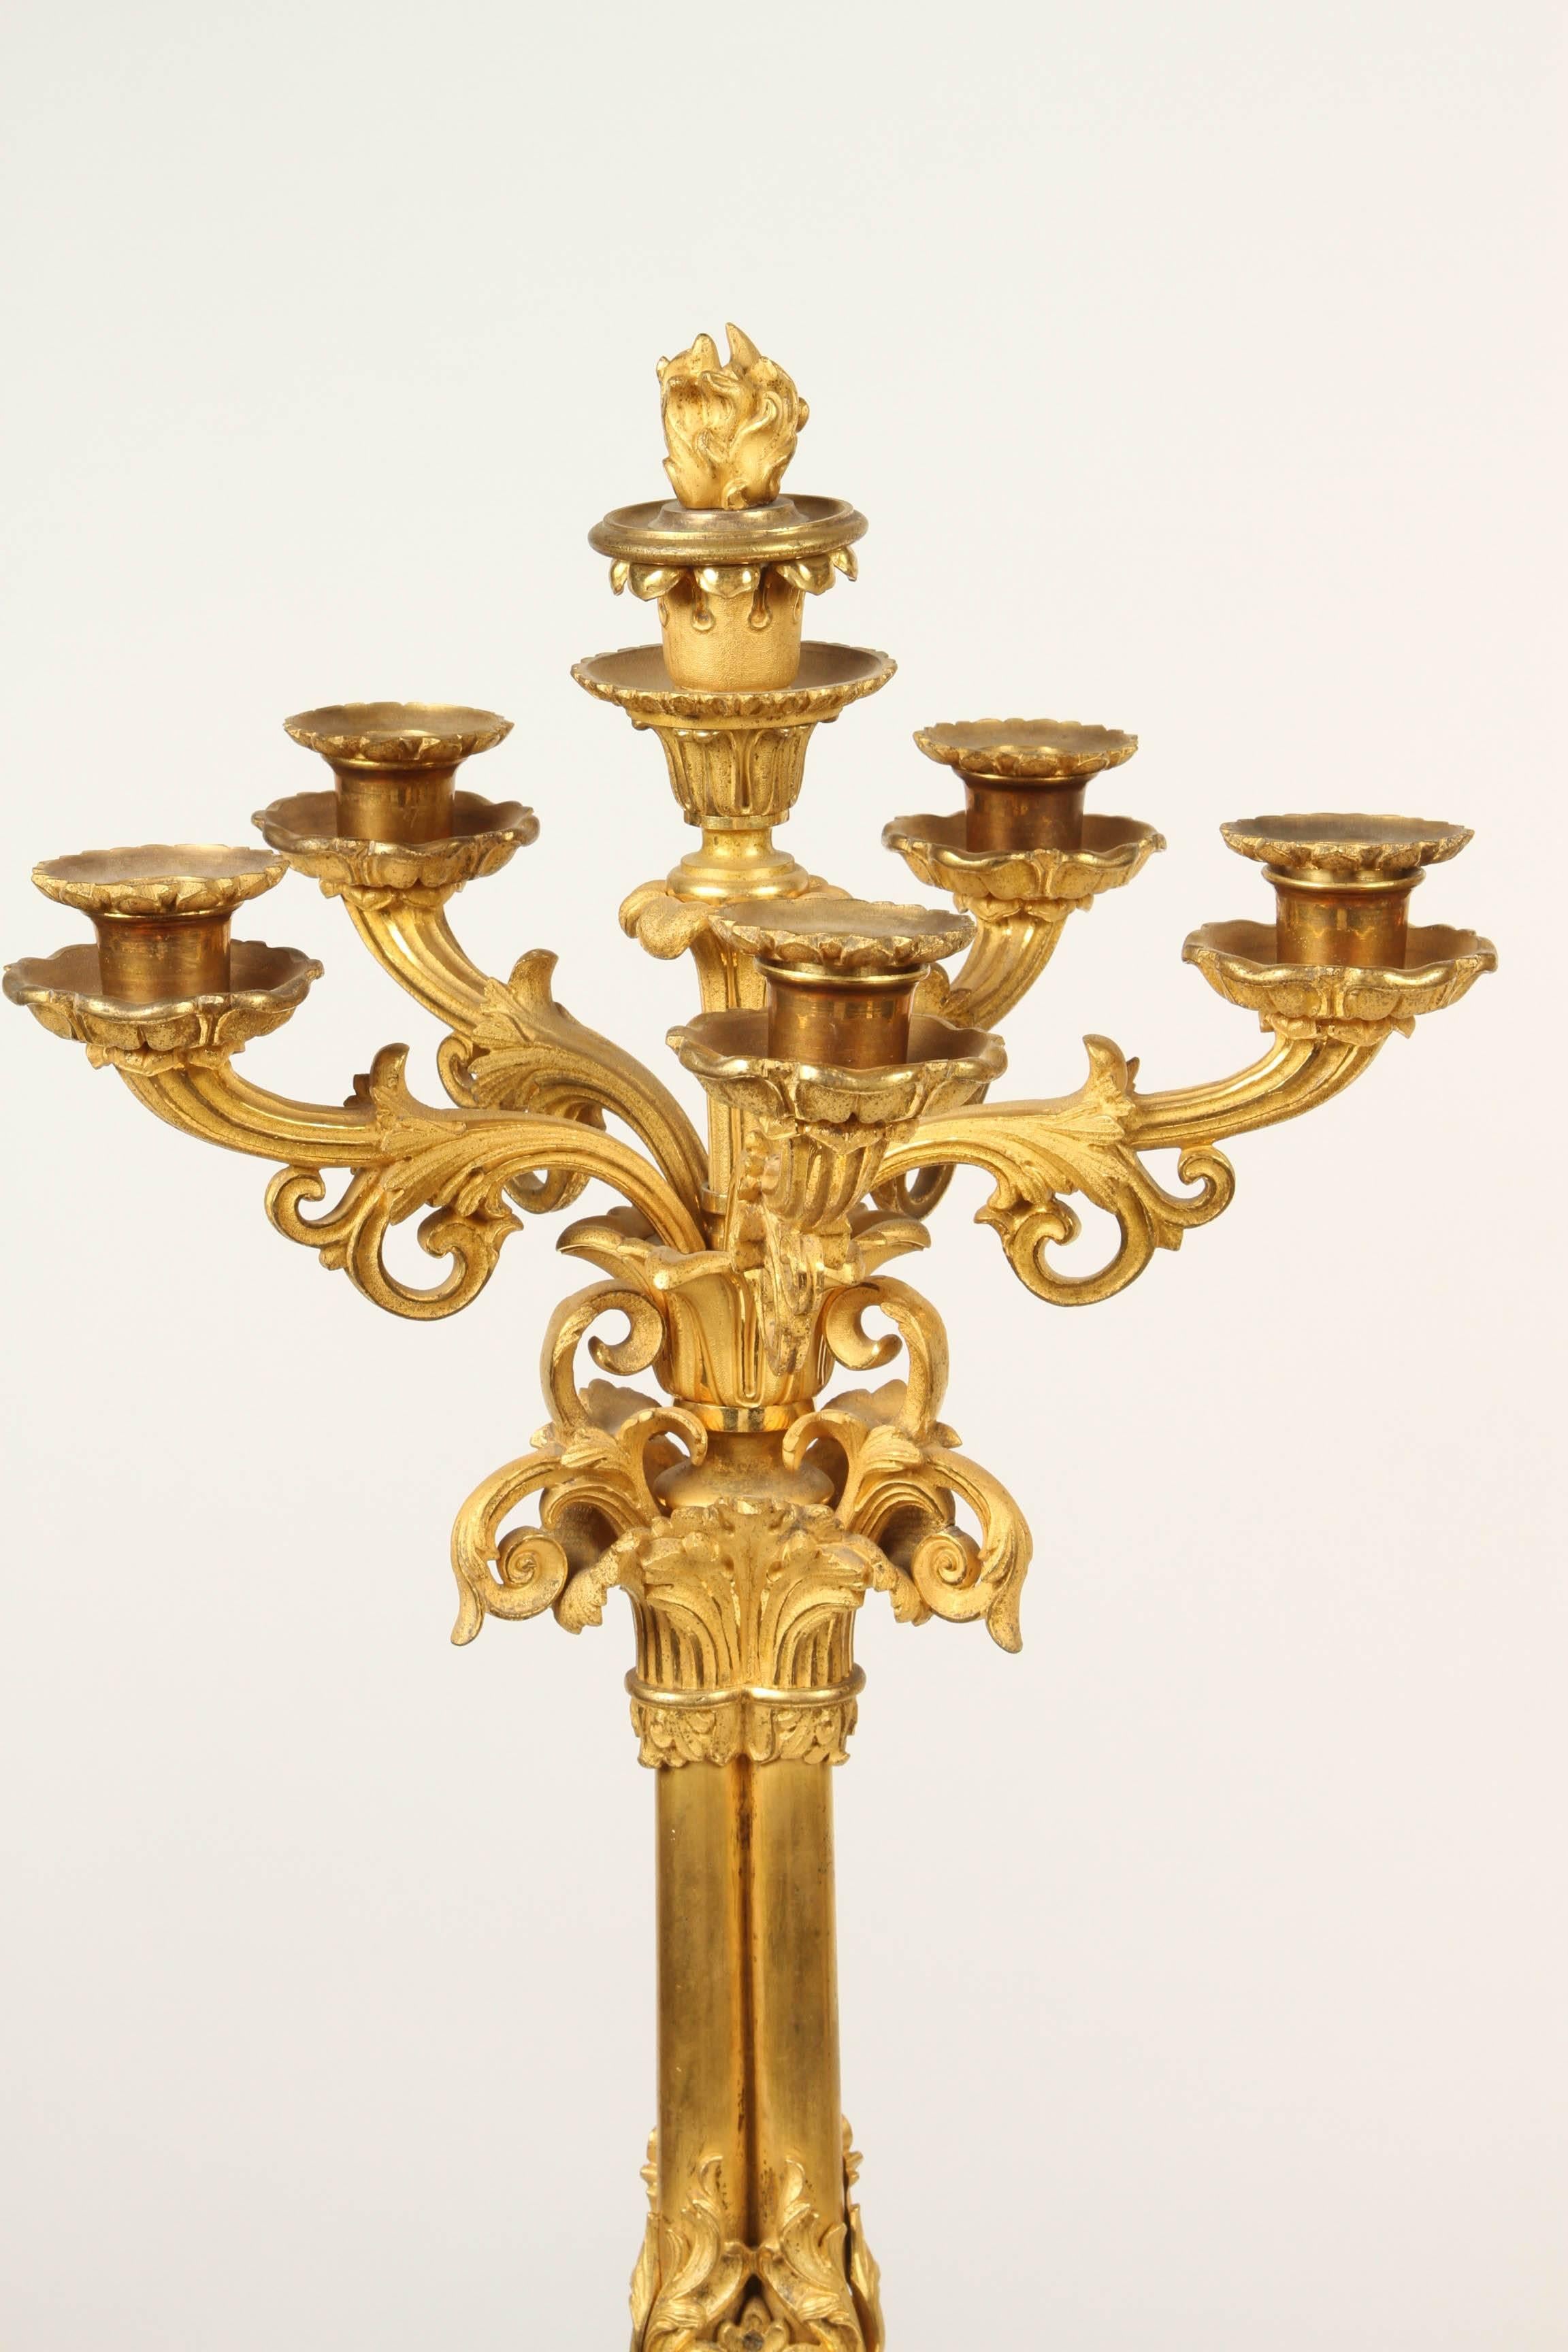 A fine pair of five branch, six candle ormolu candelabra. The candelabra rest on a triform base with foliate moulding, three feet. The tripartie stem holds the candelabra arms which are in the form of scrolling flower stems. Each candle sconce is